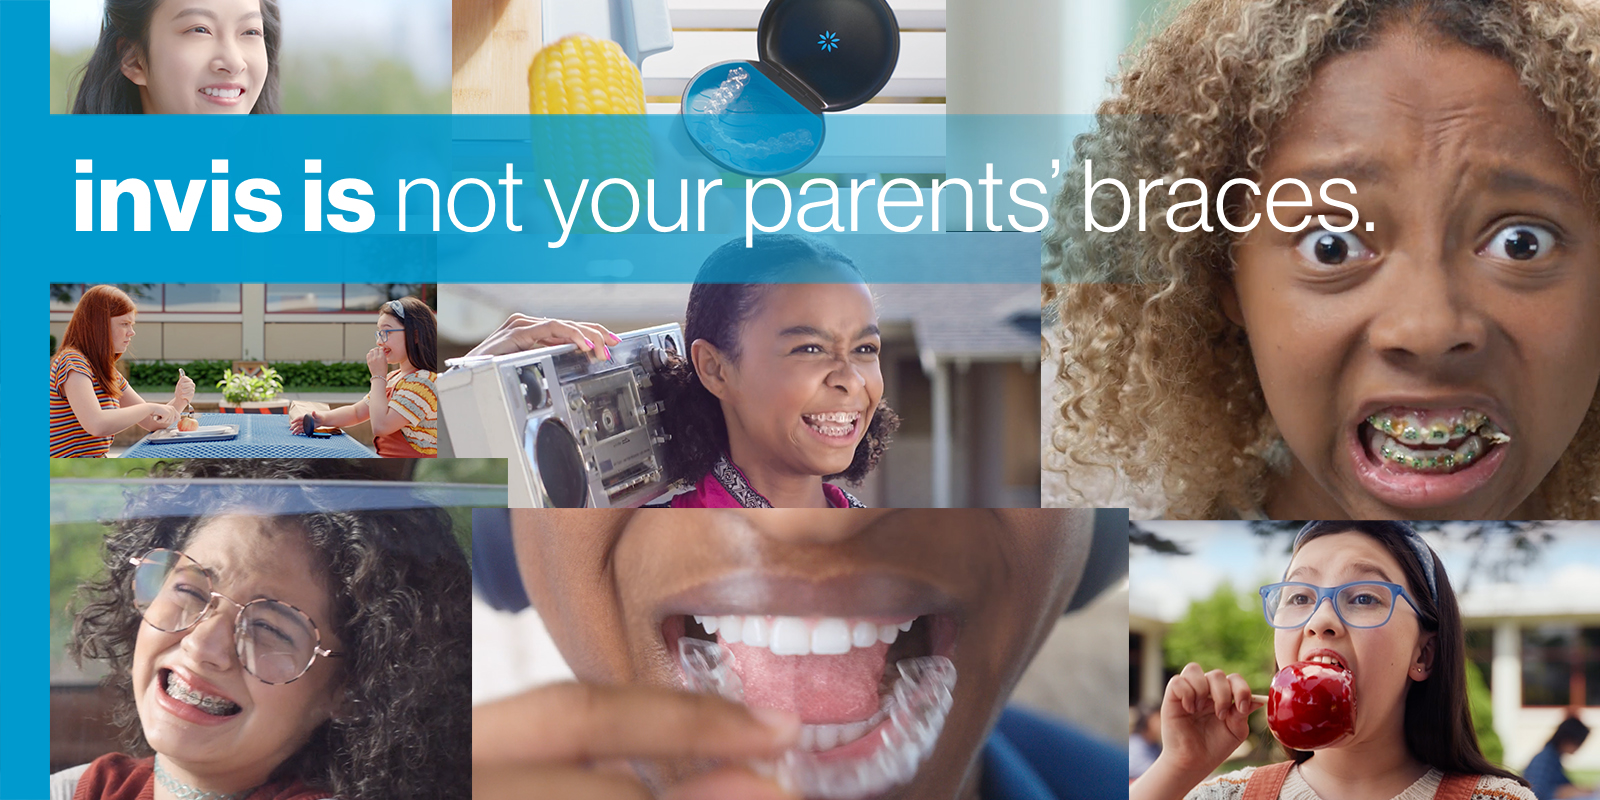 Align Technology Expands Its “Invis Is” Consumer Advertising Campaign With  New Creative and Influencers Focused on Teens, Moms, and Young Adults